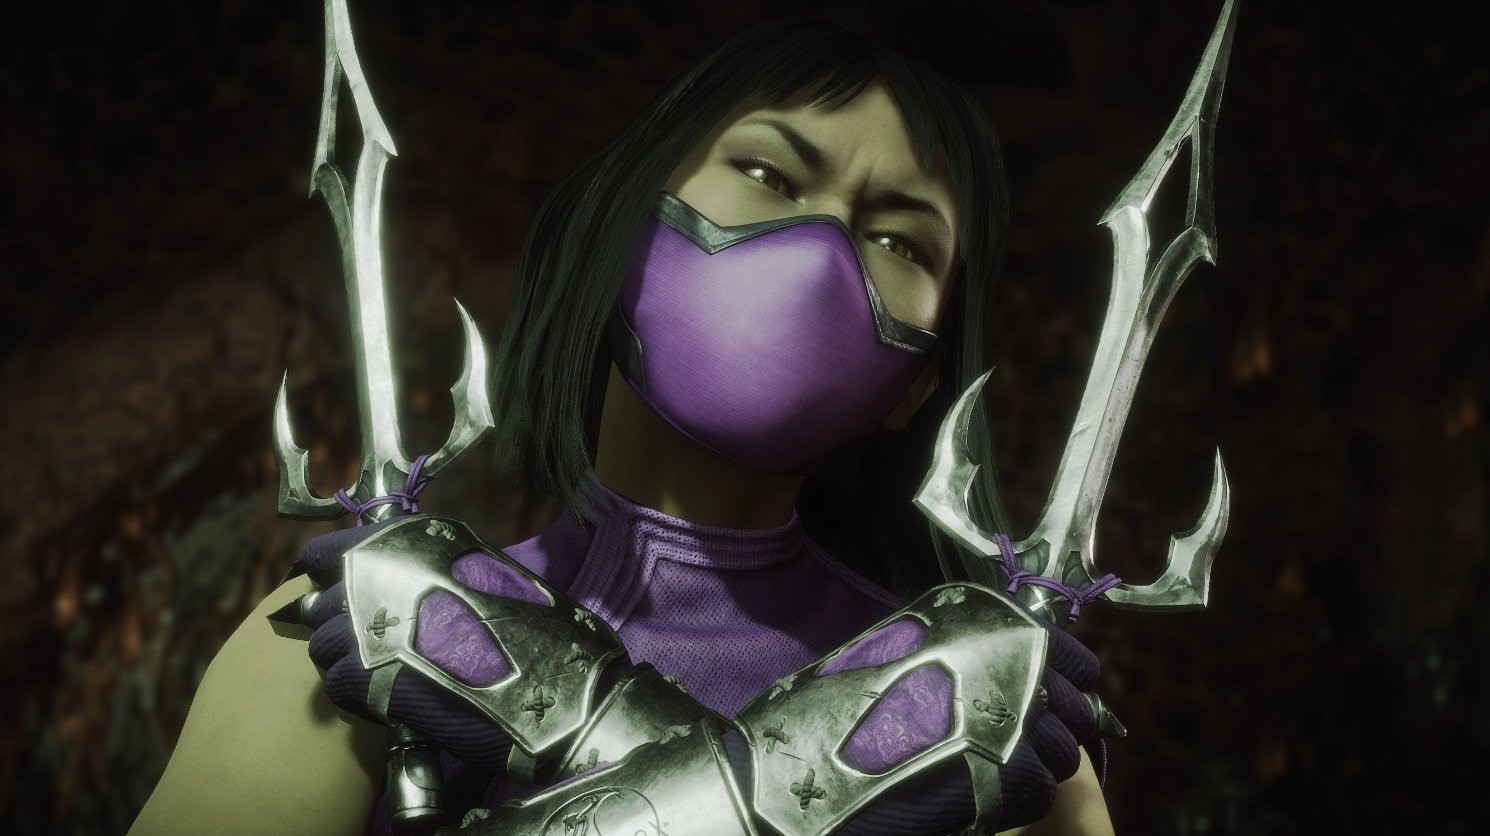 Mortal Kombat 11 Adds Crossplay In Latest Patch